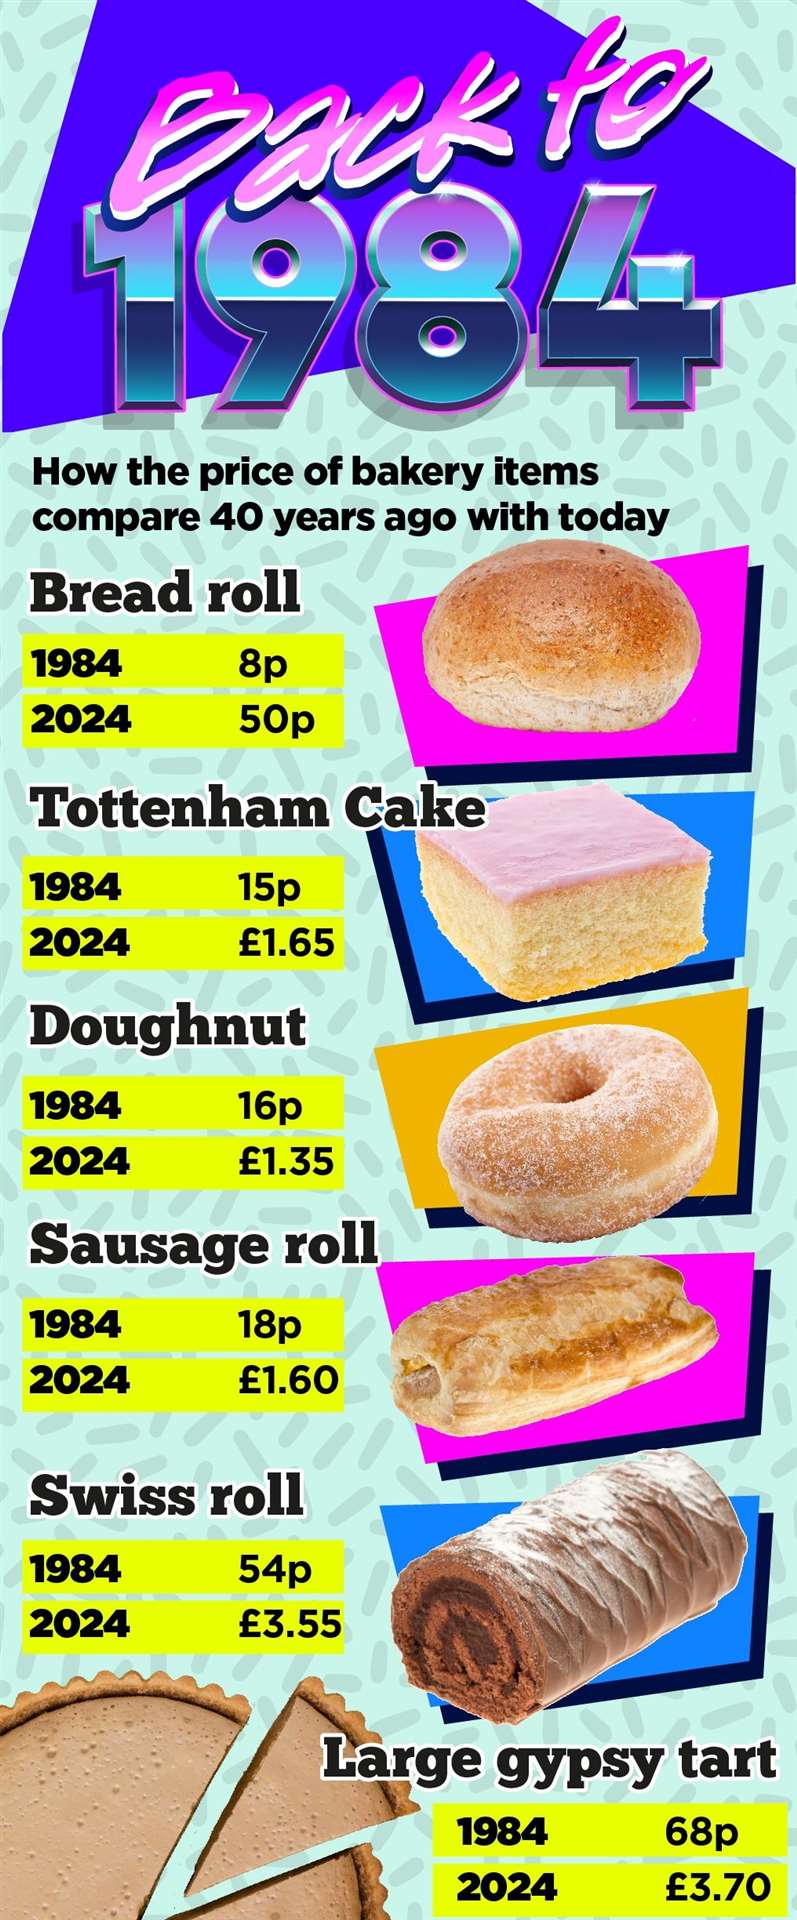 Barrow's 1984 prices compared with today